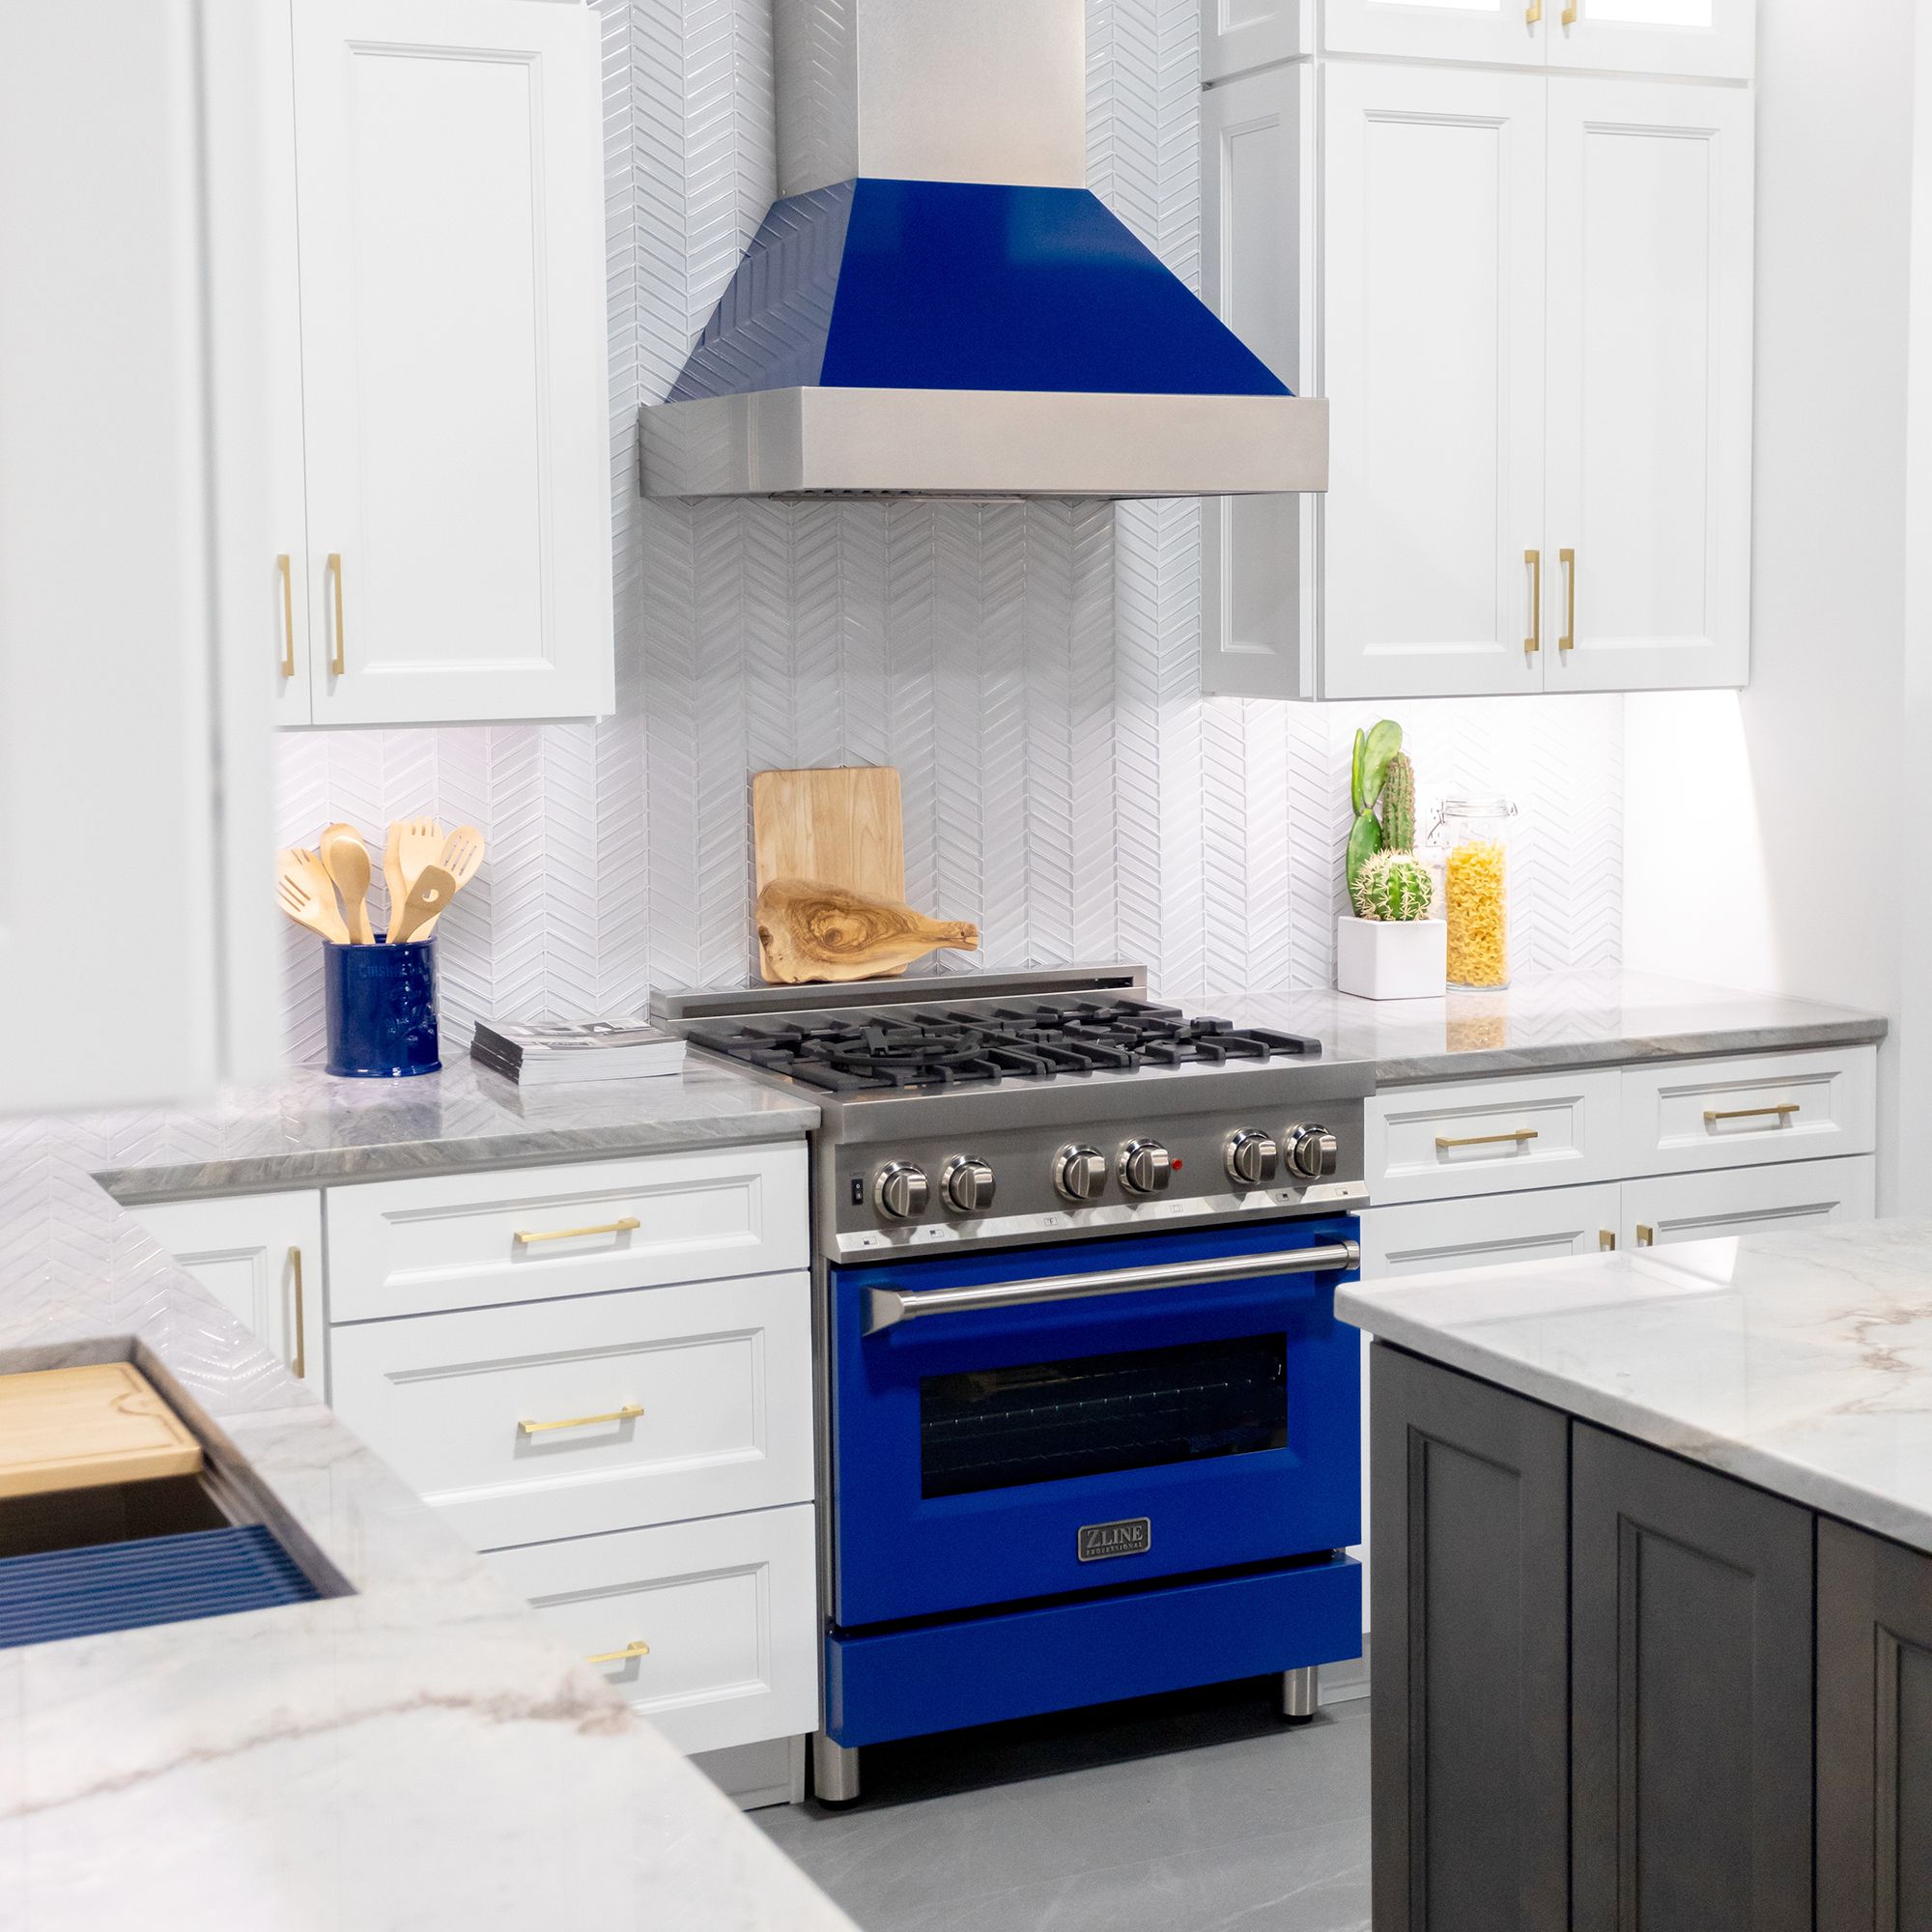 ZLINE Ducted Fingerprint Resistant Stainless Steel Range Hood with Blue Gloss Shell (8654BG) with matching blue gloss range in a white cottage-style kitchen from front.